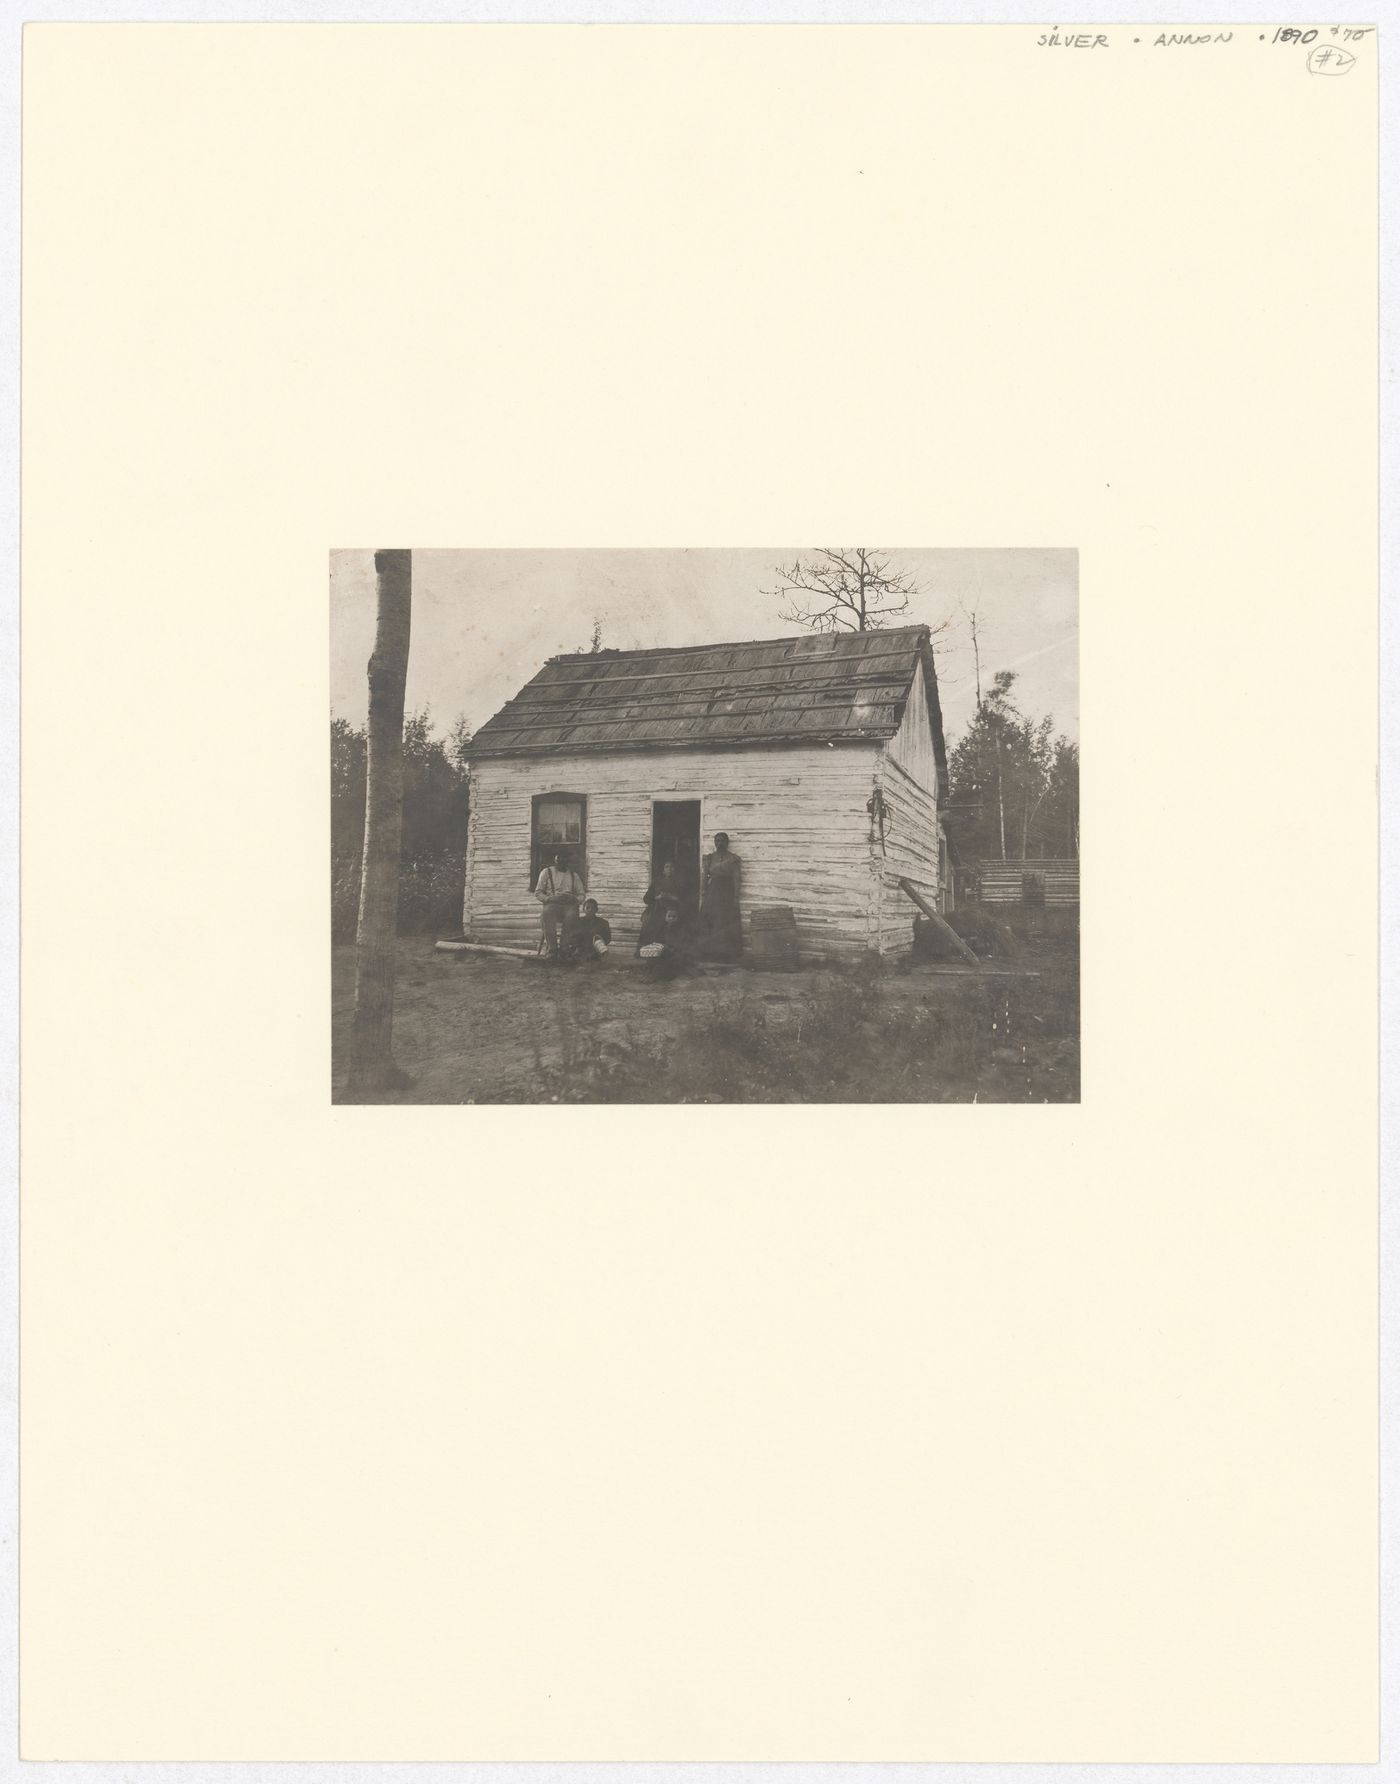 View of family in front of log cabin, probably North America